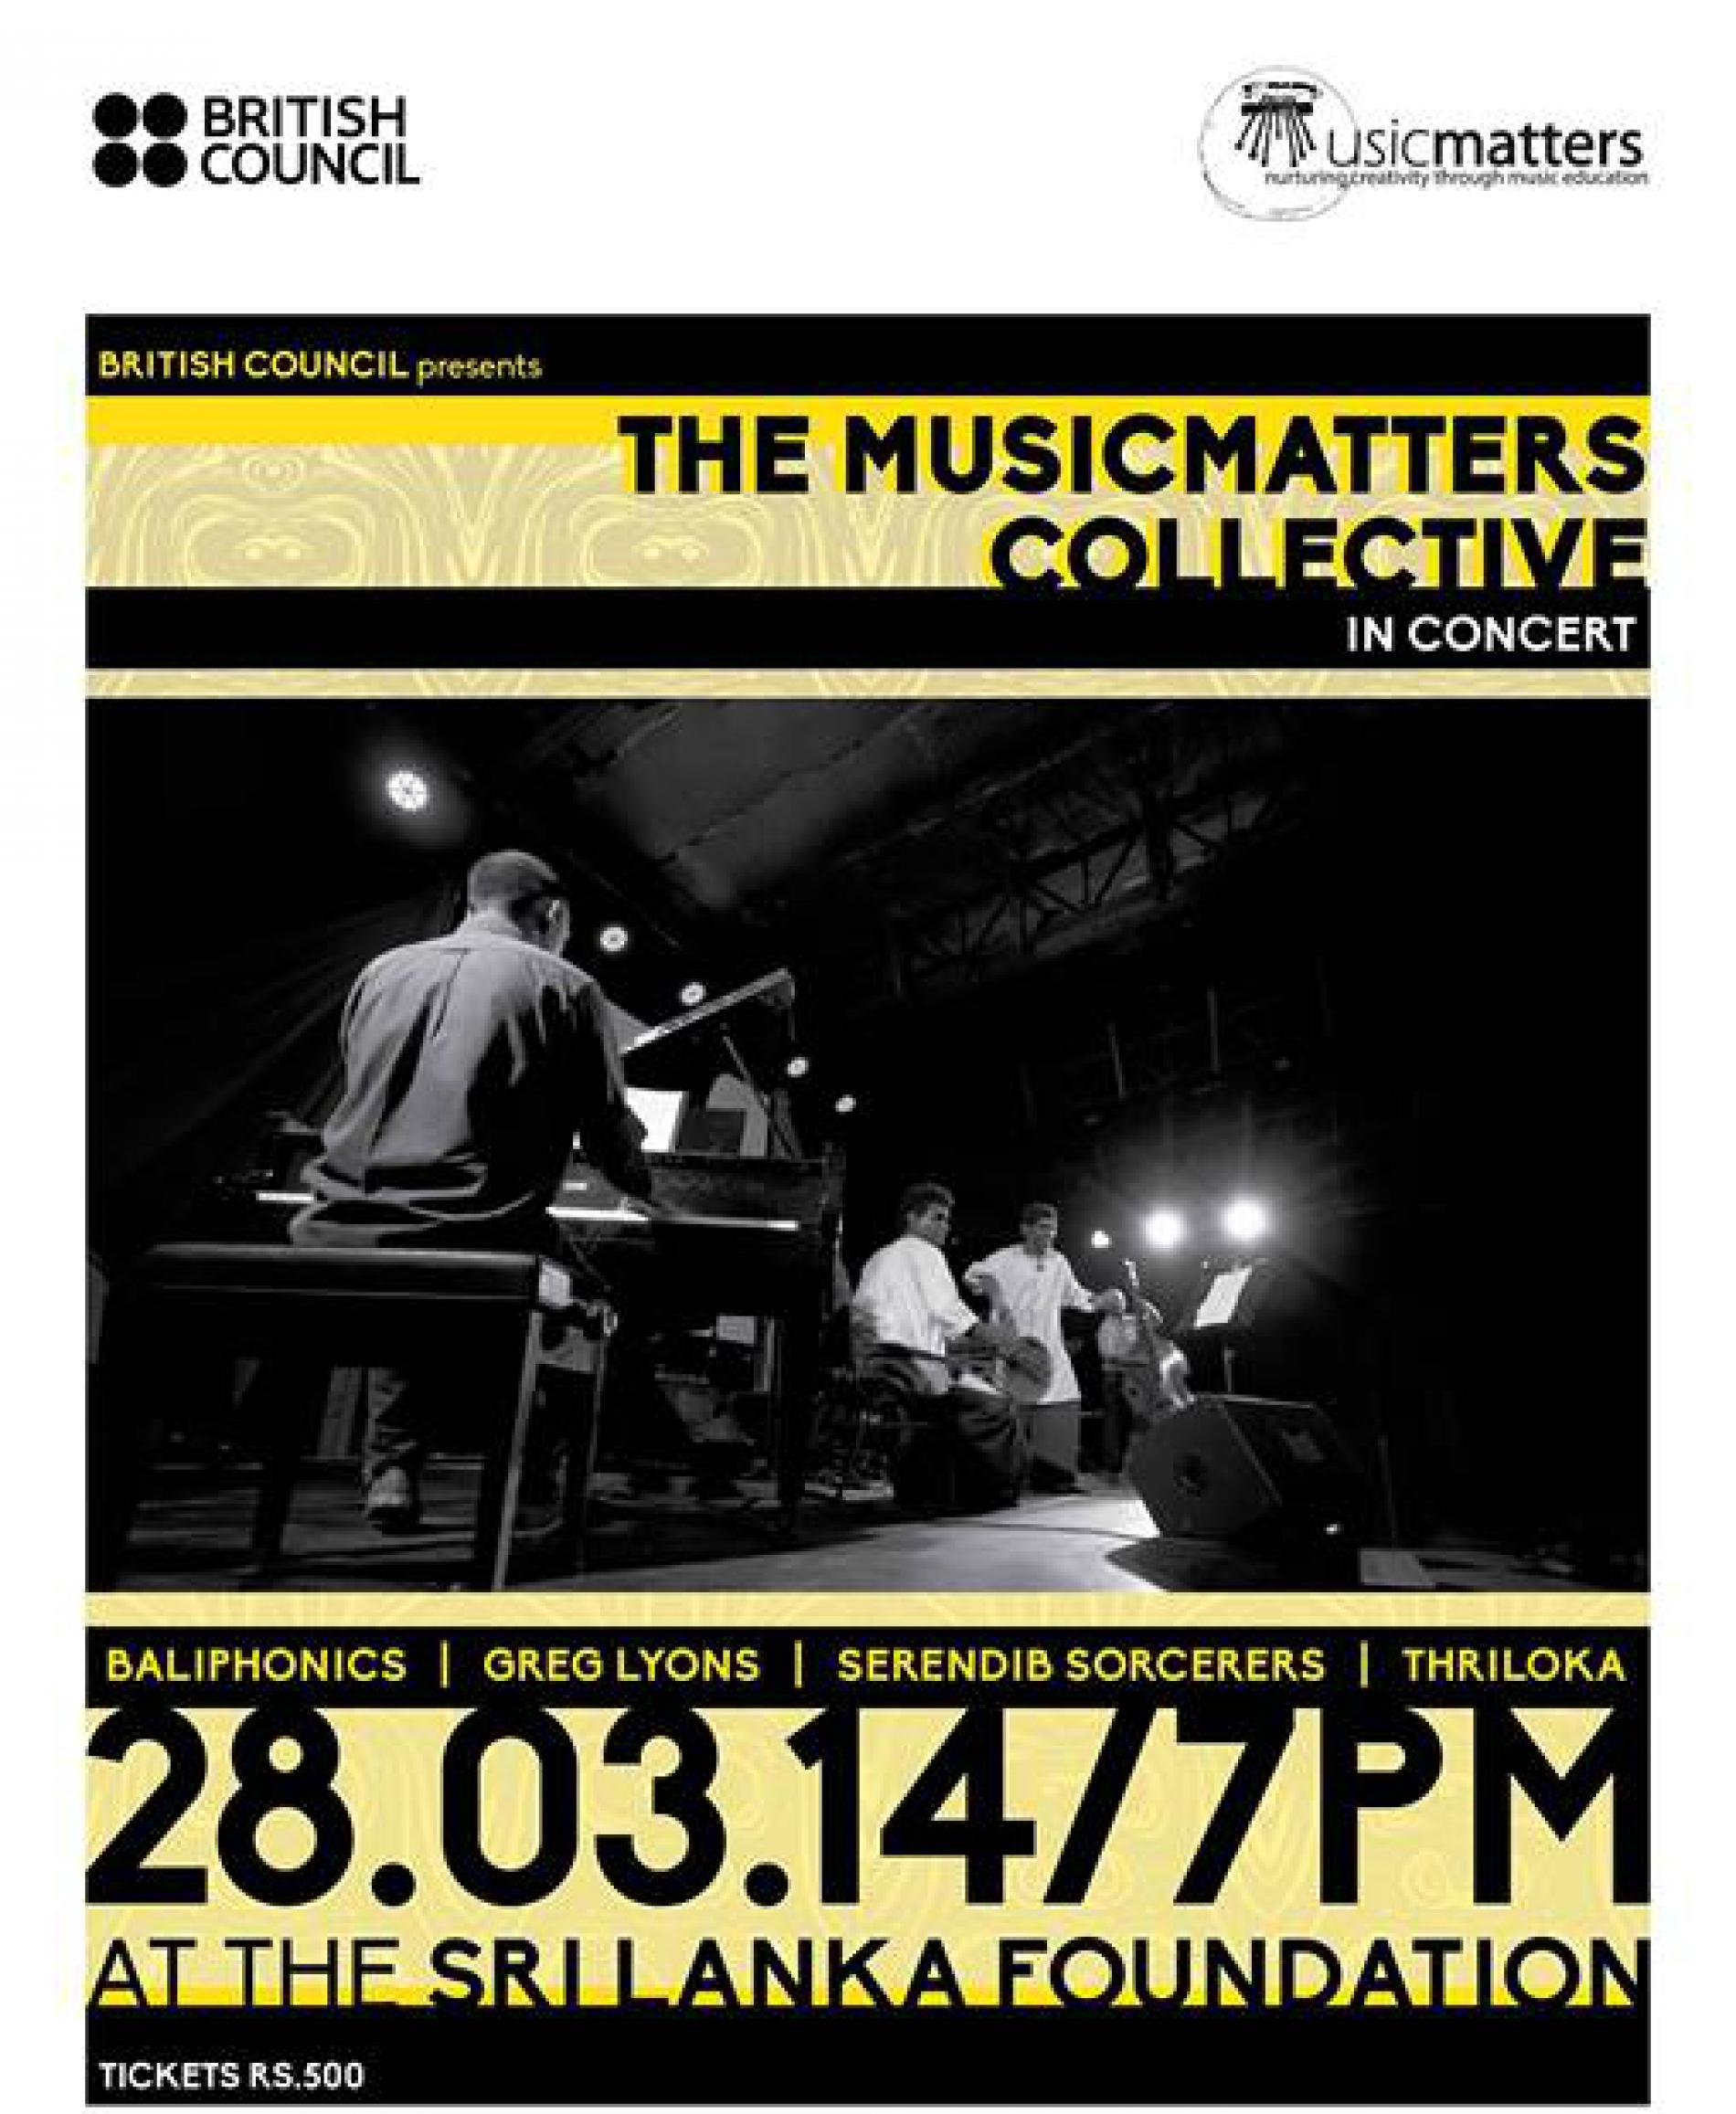 BRITISH COUNCIL presents the MUSICMATTERS COLLECTIVE in concert